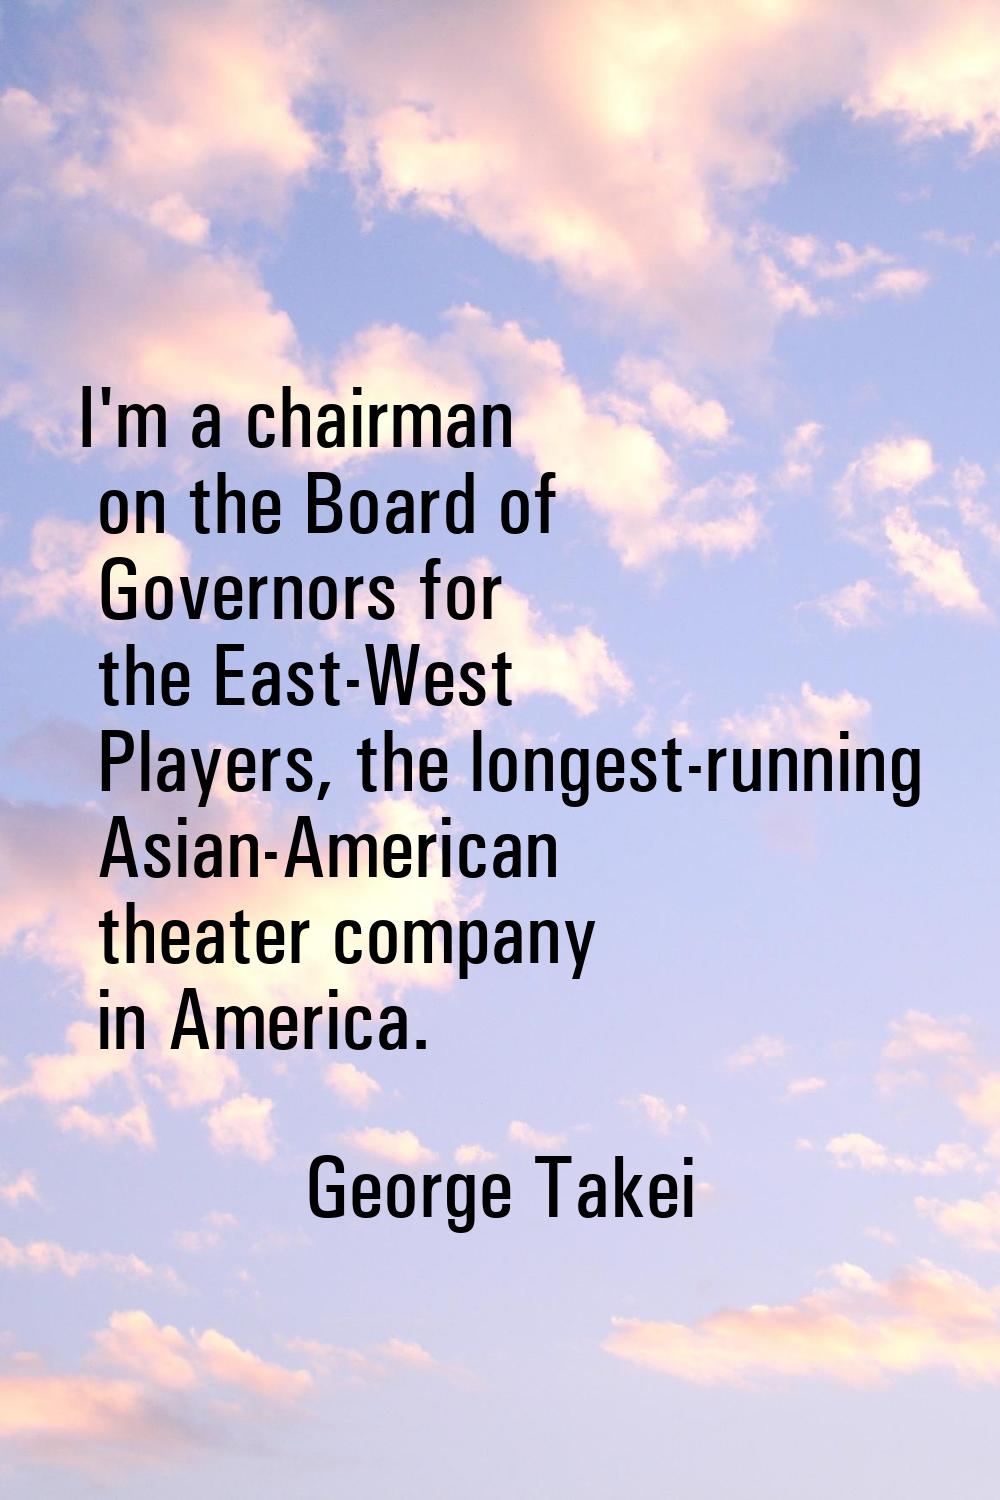 I'm a chairman on the Board of Governors for the East-West Players, the longest-running Asian-Ameri